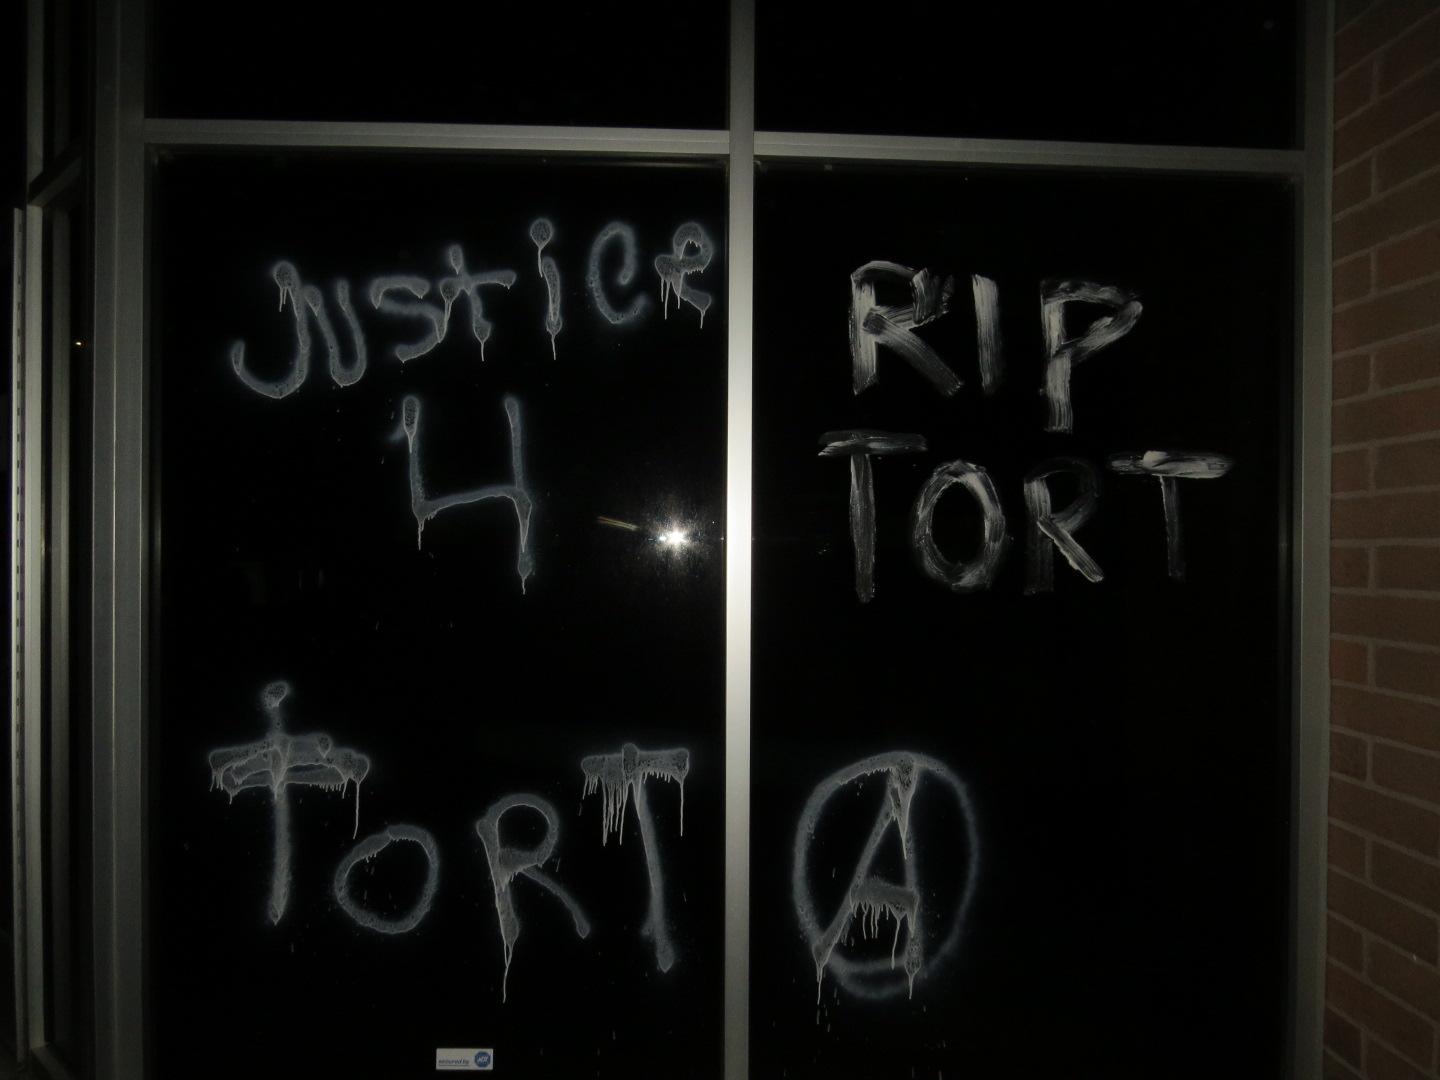 On a black window, white paint spells "JUSTICE 4 TORT" on one pane, and "RIP TORT" with an anarchist circle-A symbol on the other pane.